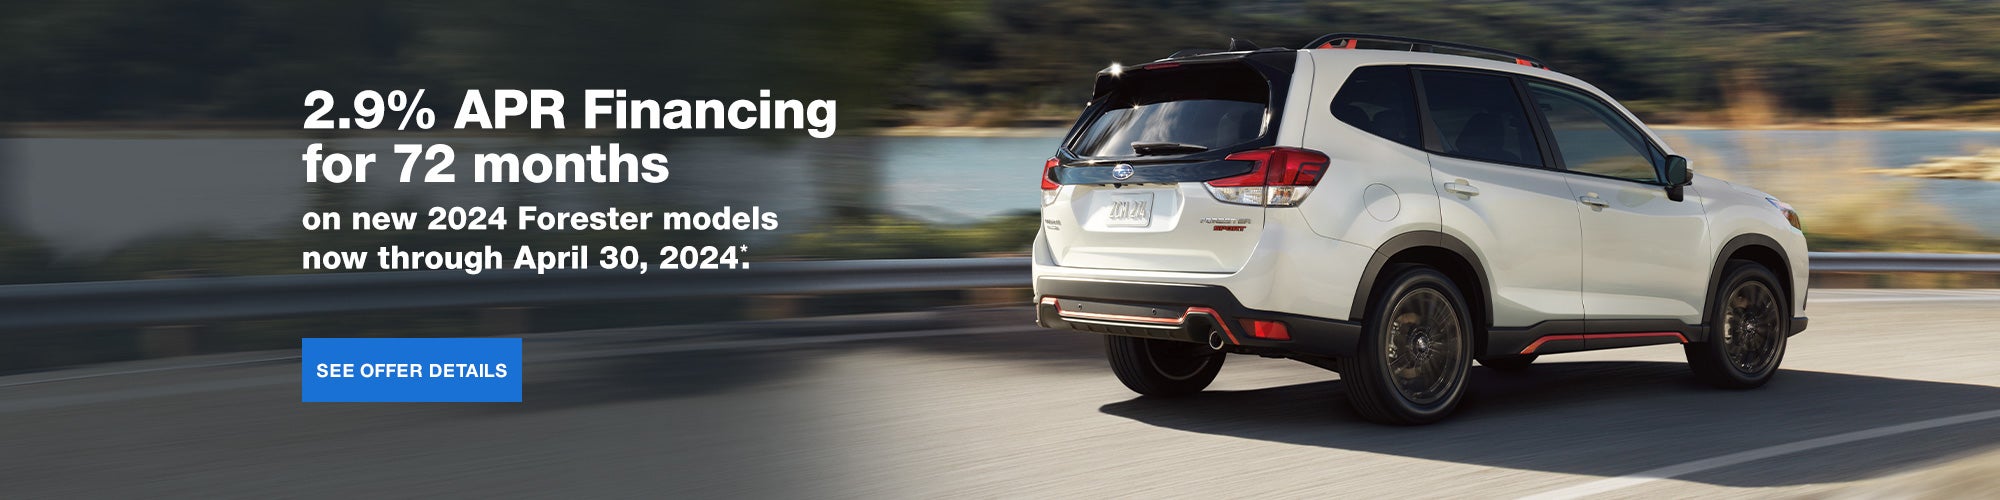 2.9% APR Financing for 72 Months | 2024 Forester